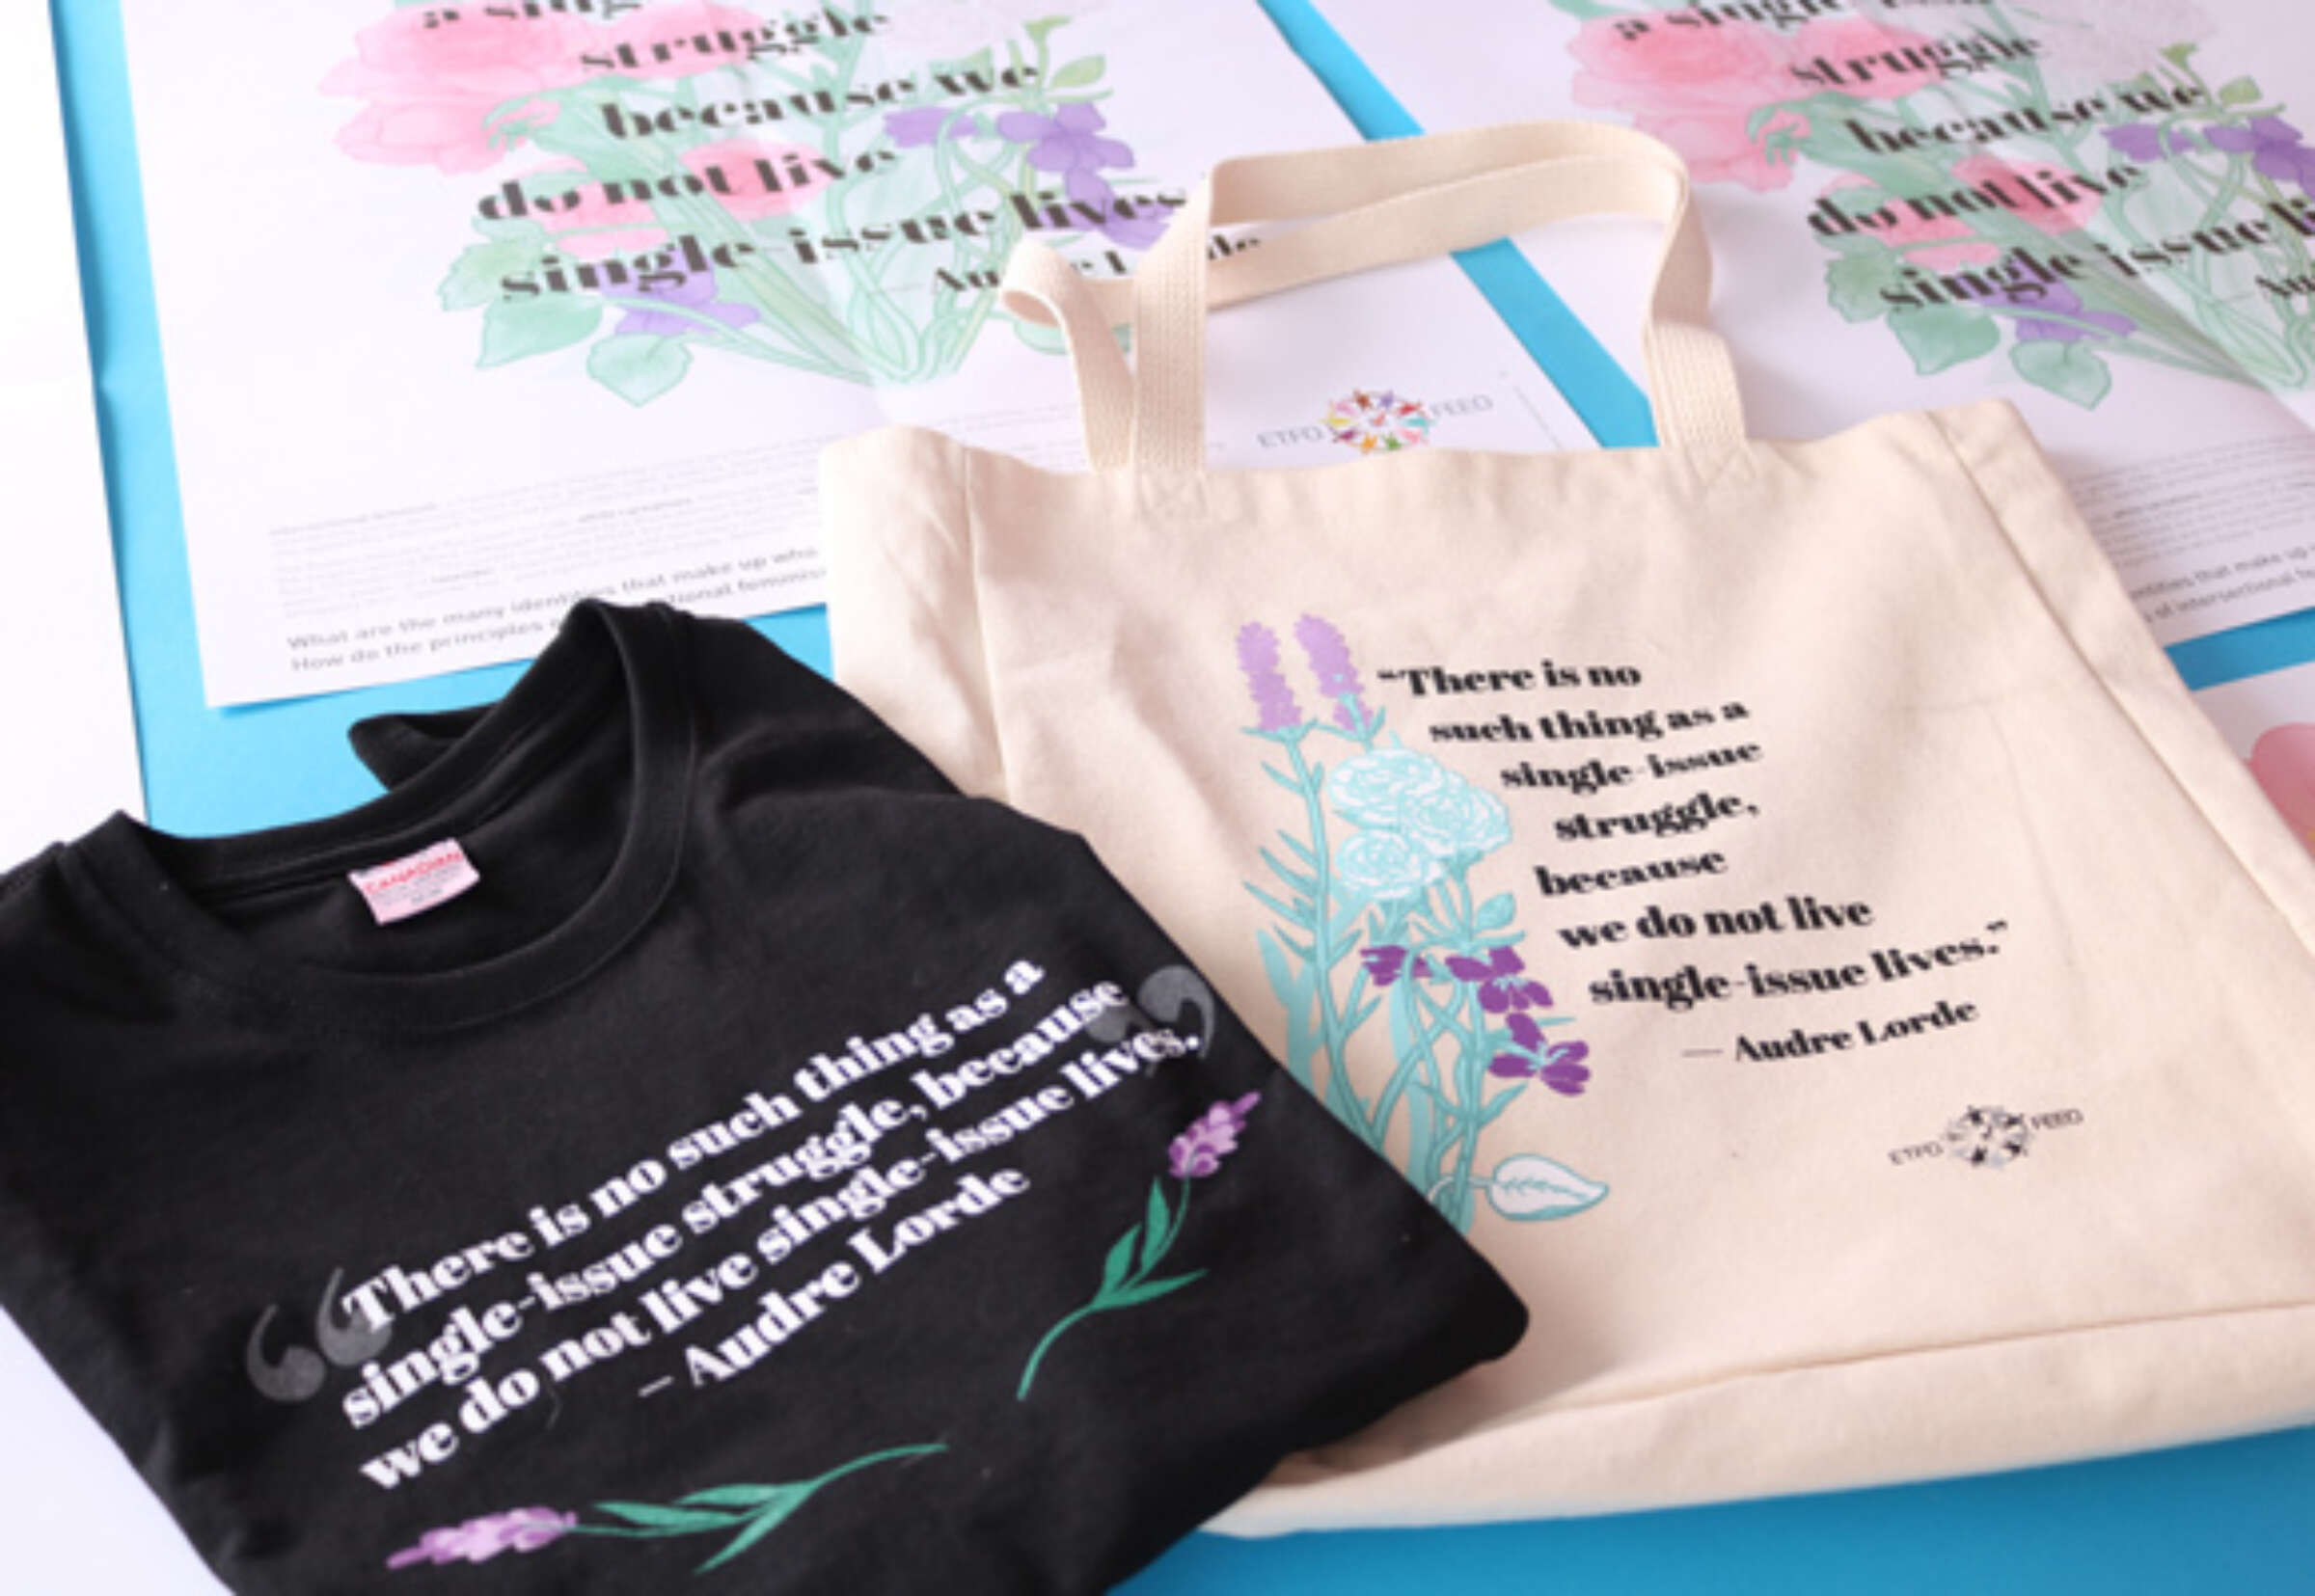 Displayed on a blue surface are a black T-shirt and a beige tote bag, both featuring a quote by Audre Lorde: "There is no such thing as a single-issue struggle because we do not live single-issue lives," and decorated with lavender and floral illustrations.